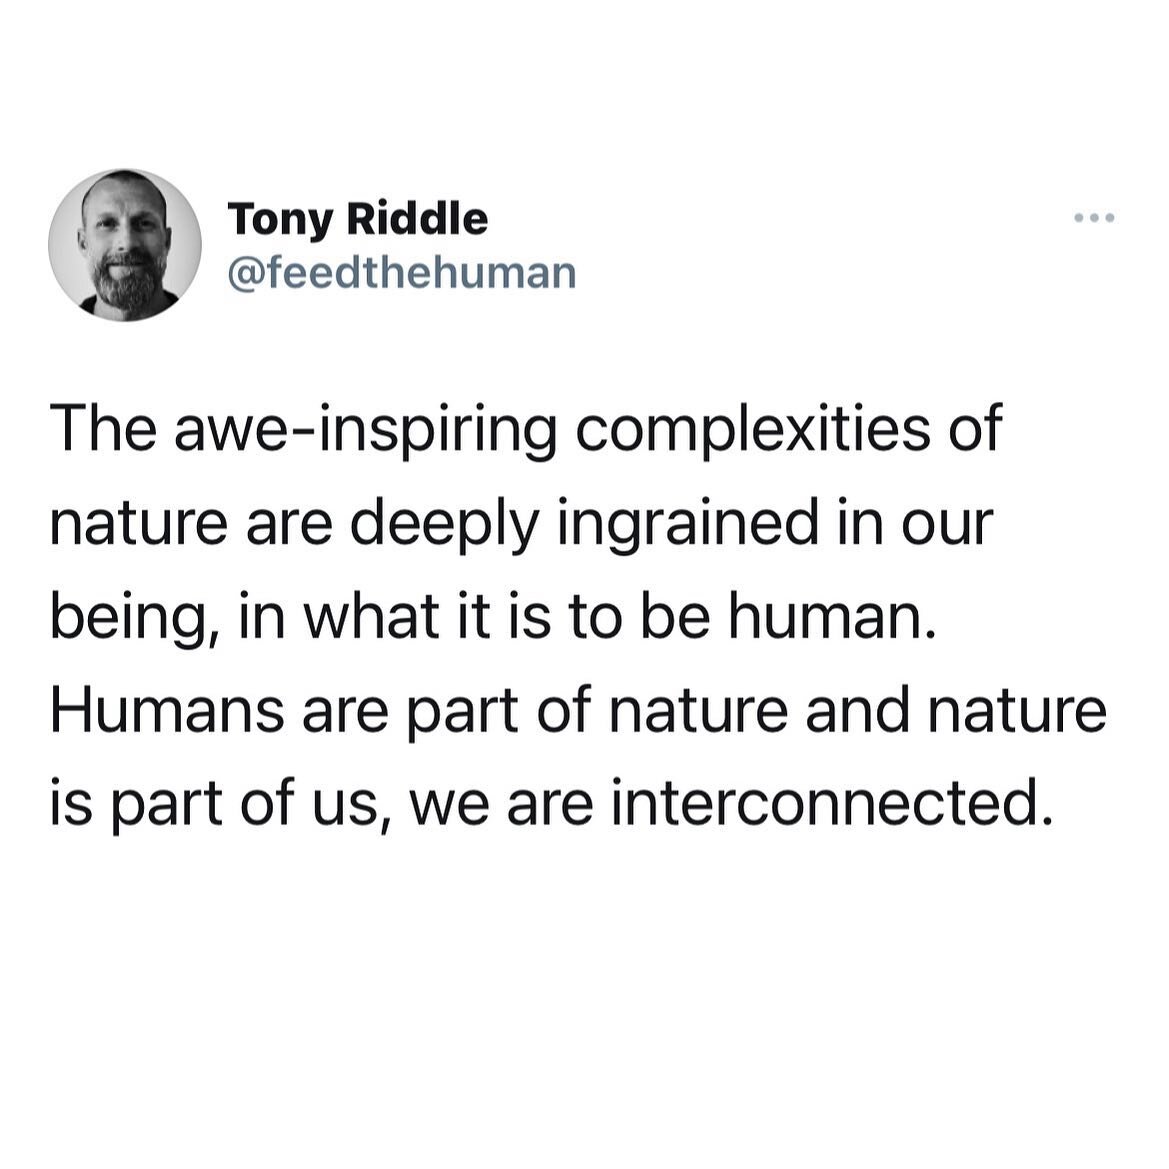 The awe-inspiring complexities of nature are deeply ingrained in our being, in what it is to be human. Humans are part of nature and nature is part of us, we are interconnected.
One could say that those who align with the natural order of all things 